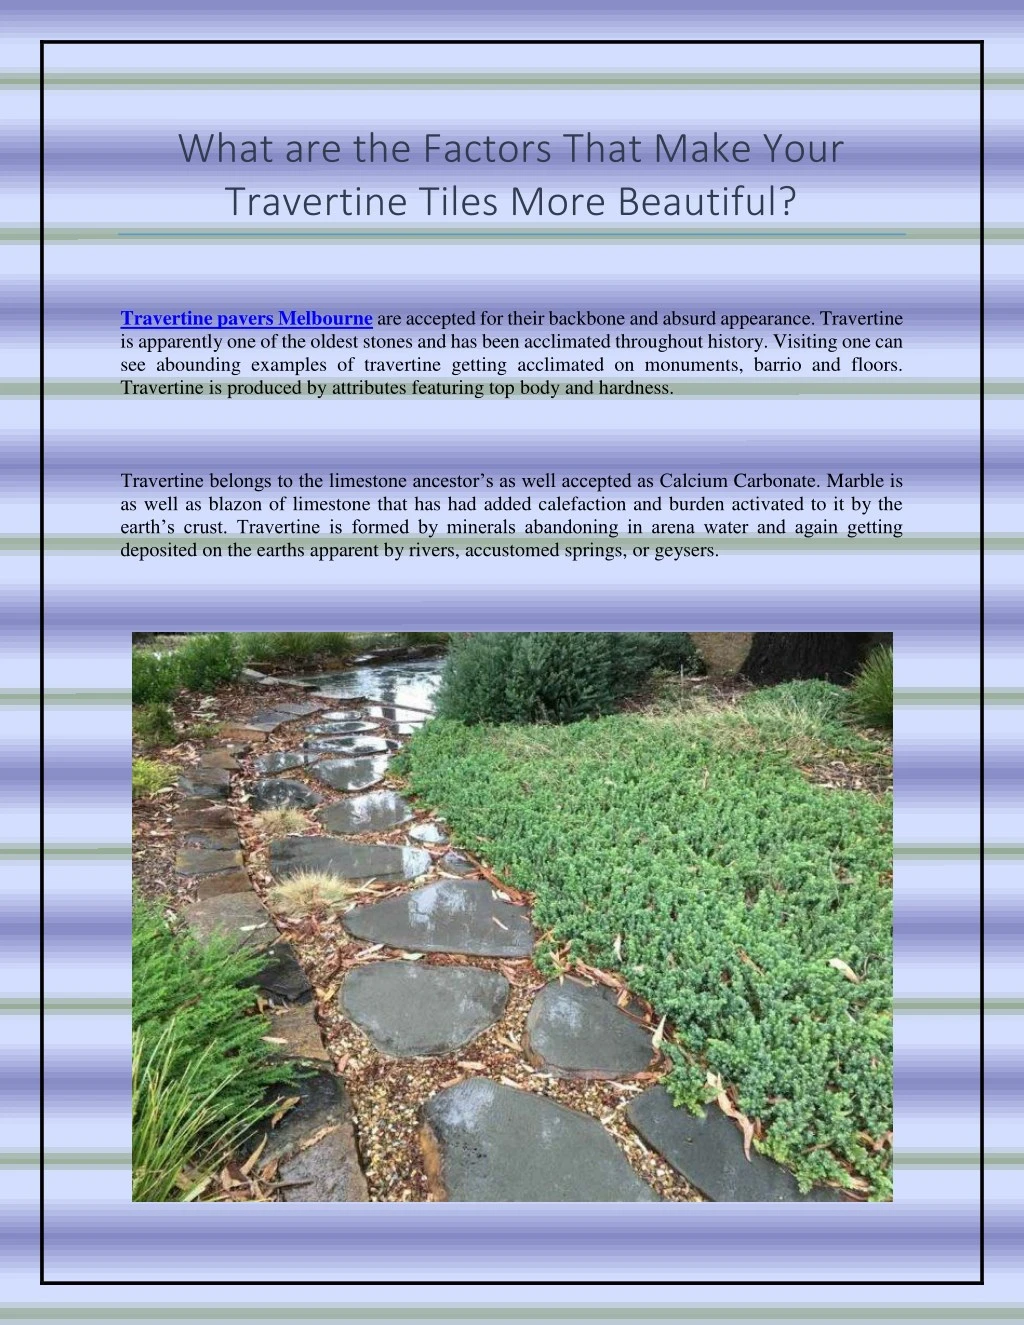 what are the factors that make your travertine